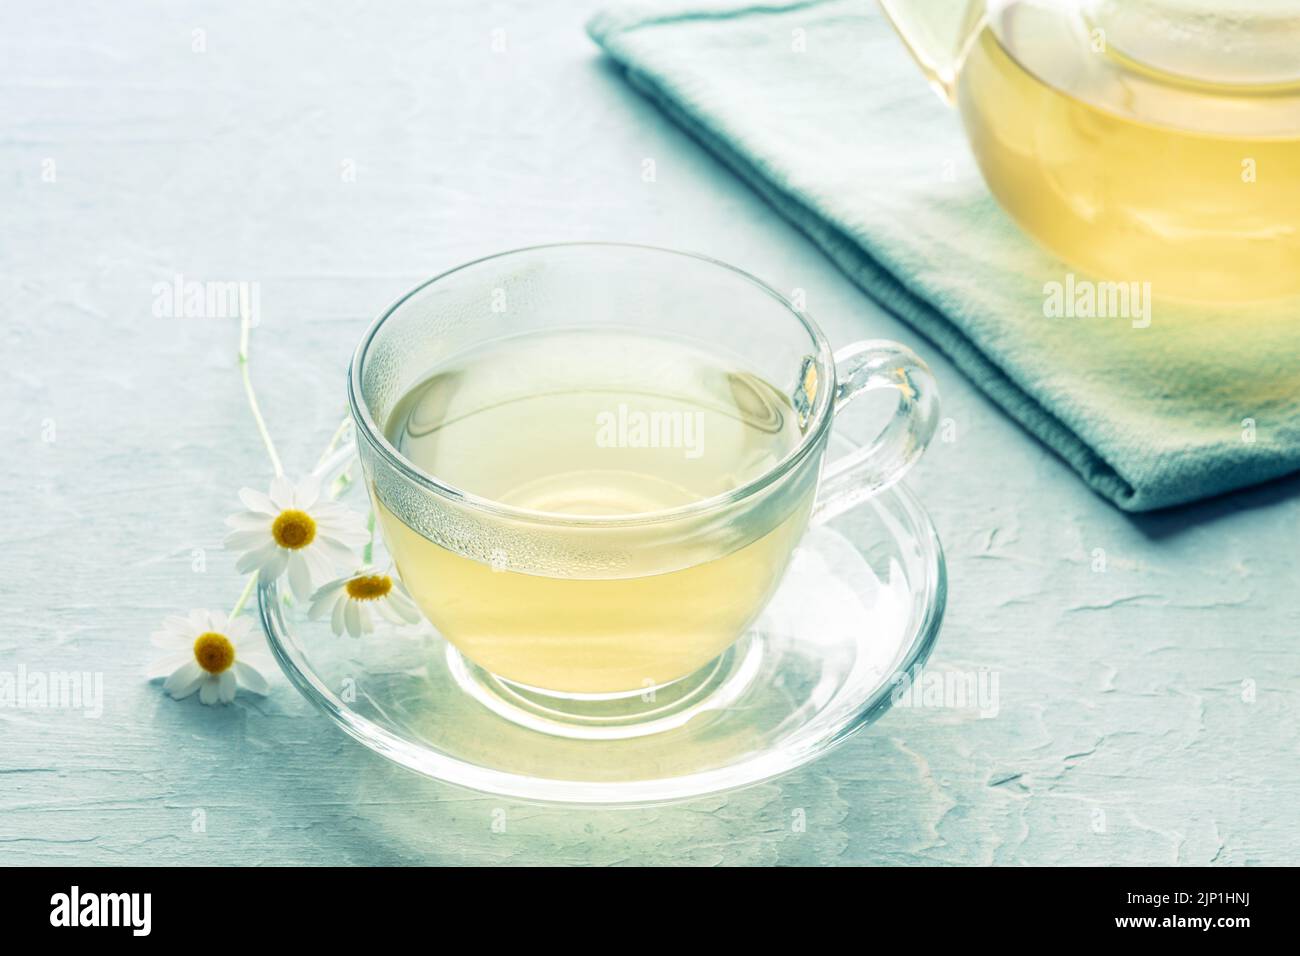 Camomile tea, floral infusion to heal and relax, natural treatment, organic tisane Stock Photo